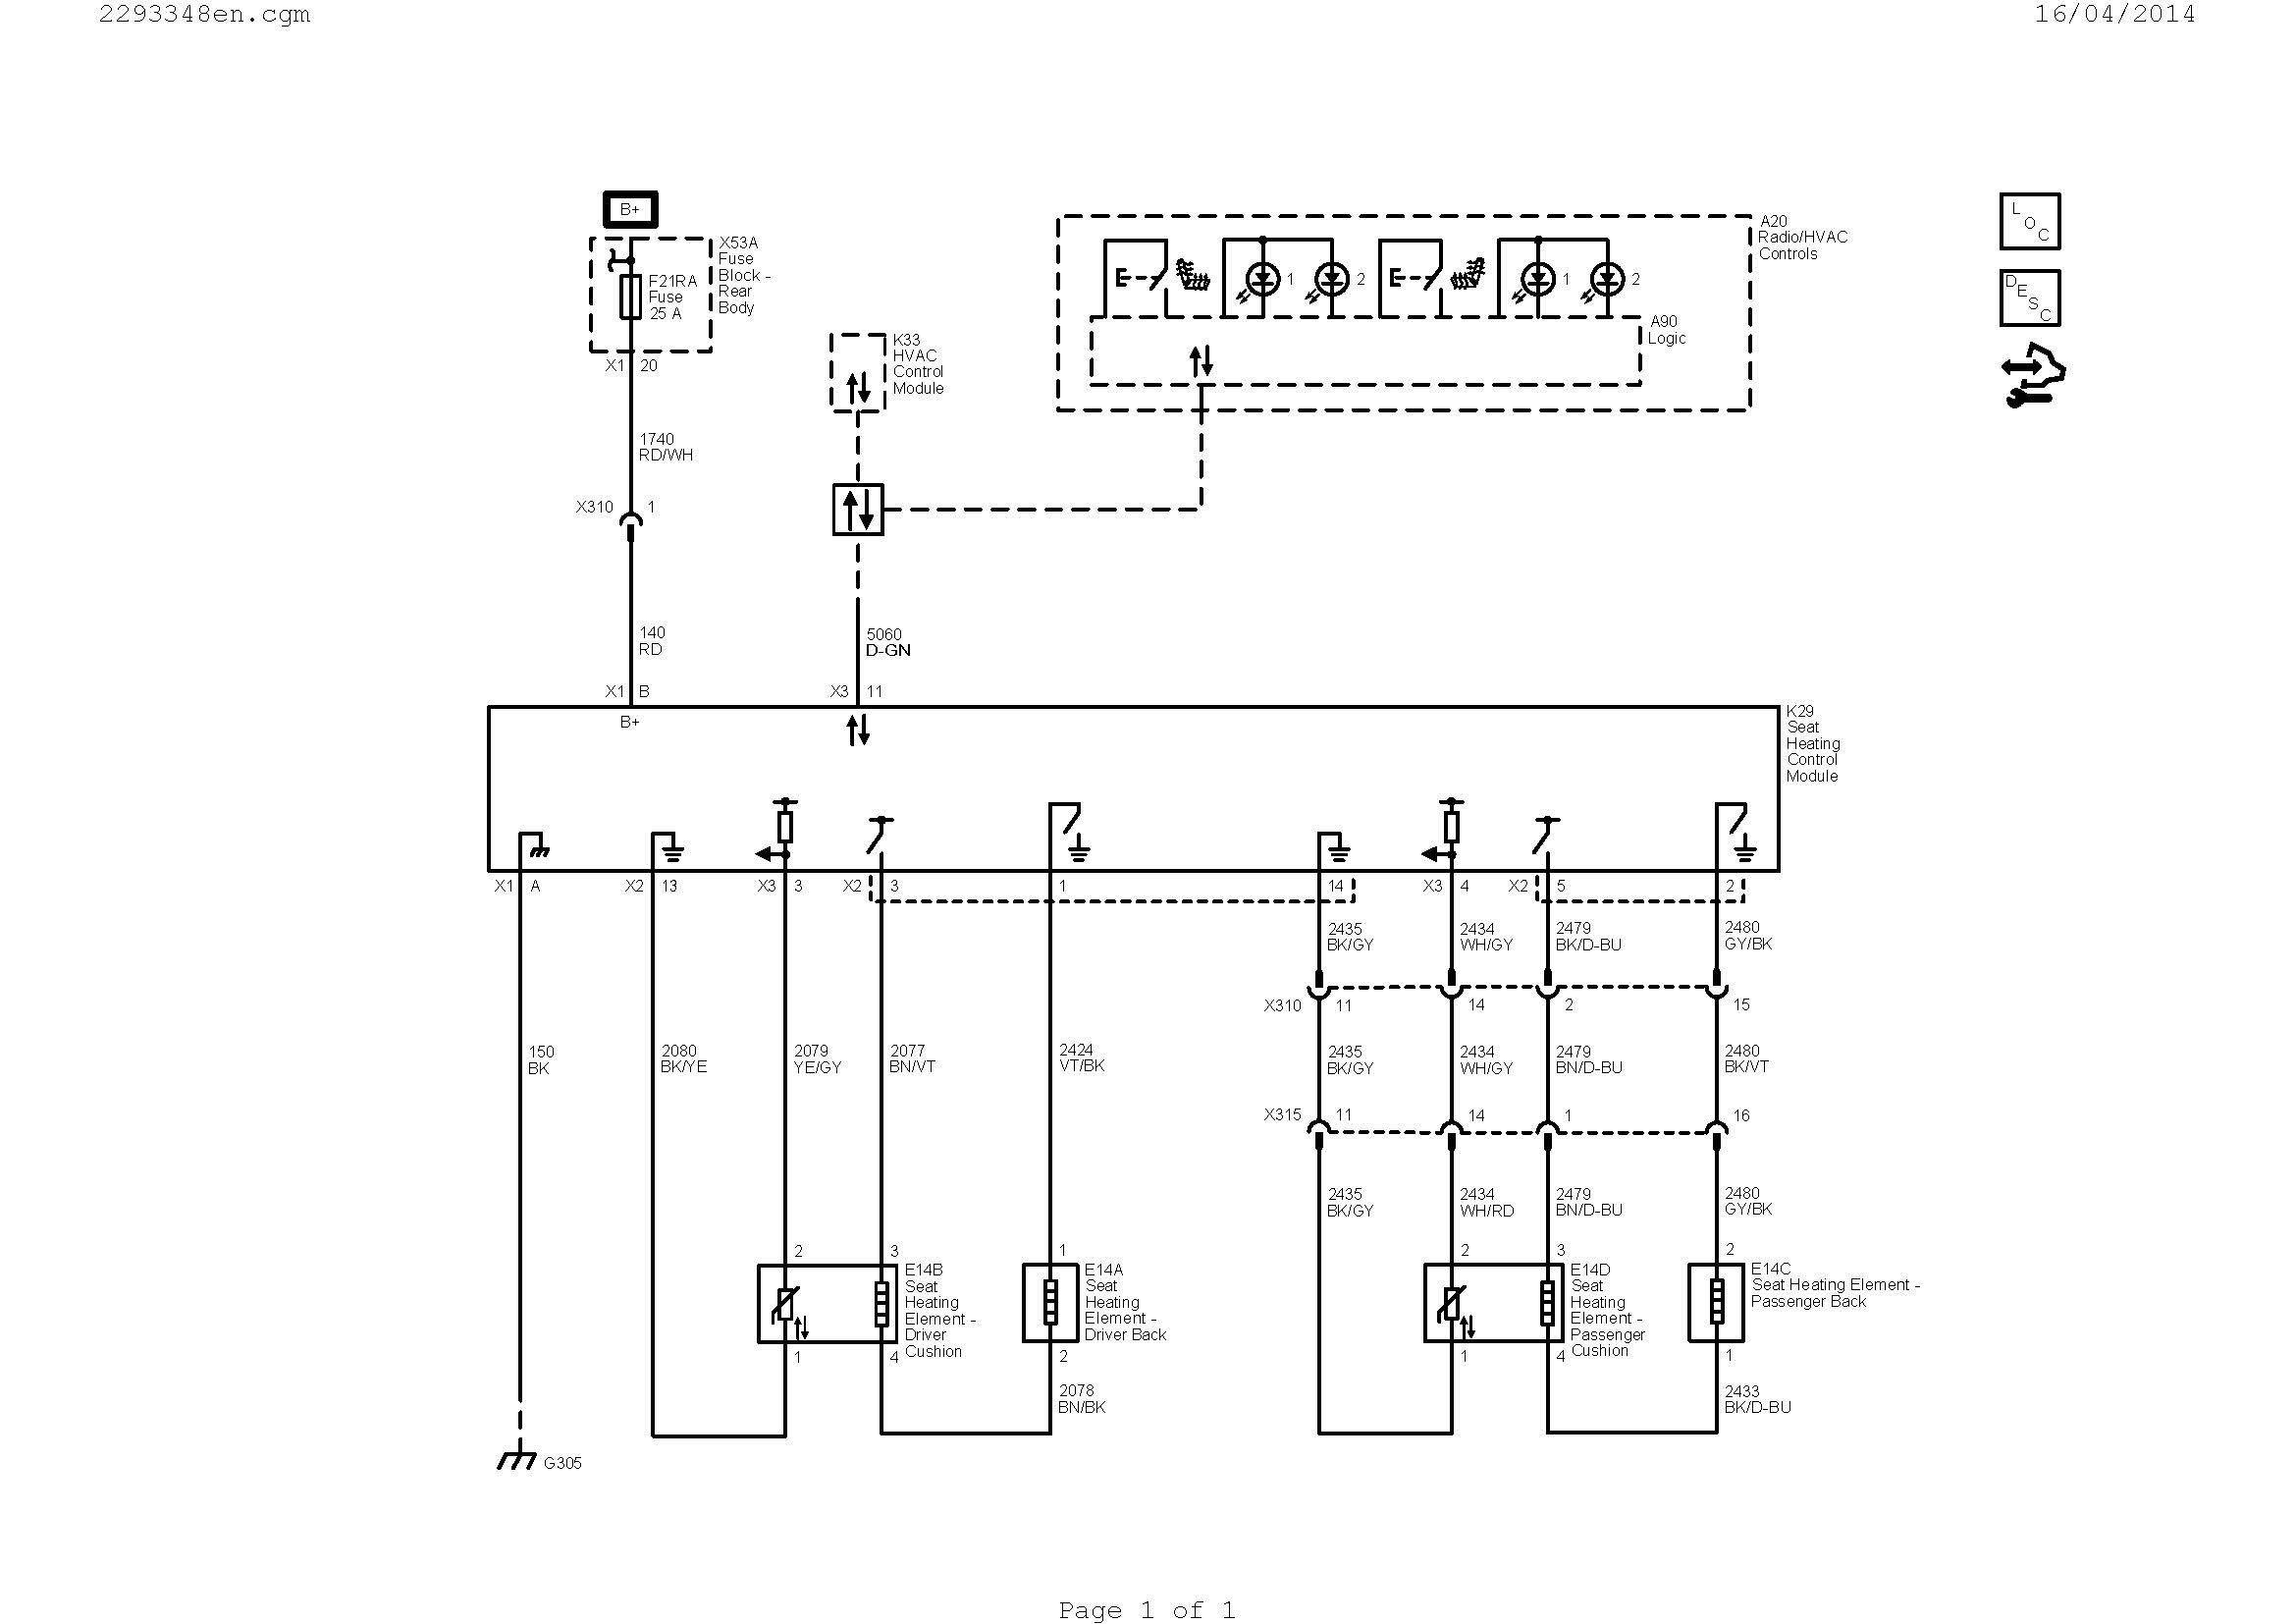 Wiring Diagram for House Plugs Valid Wiring Diagram for House Phone Jack New Electrical Wiring Diagrams